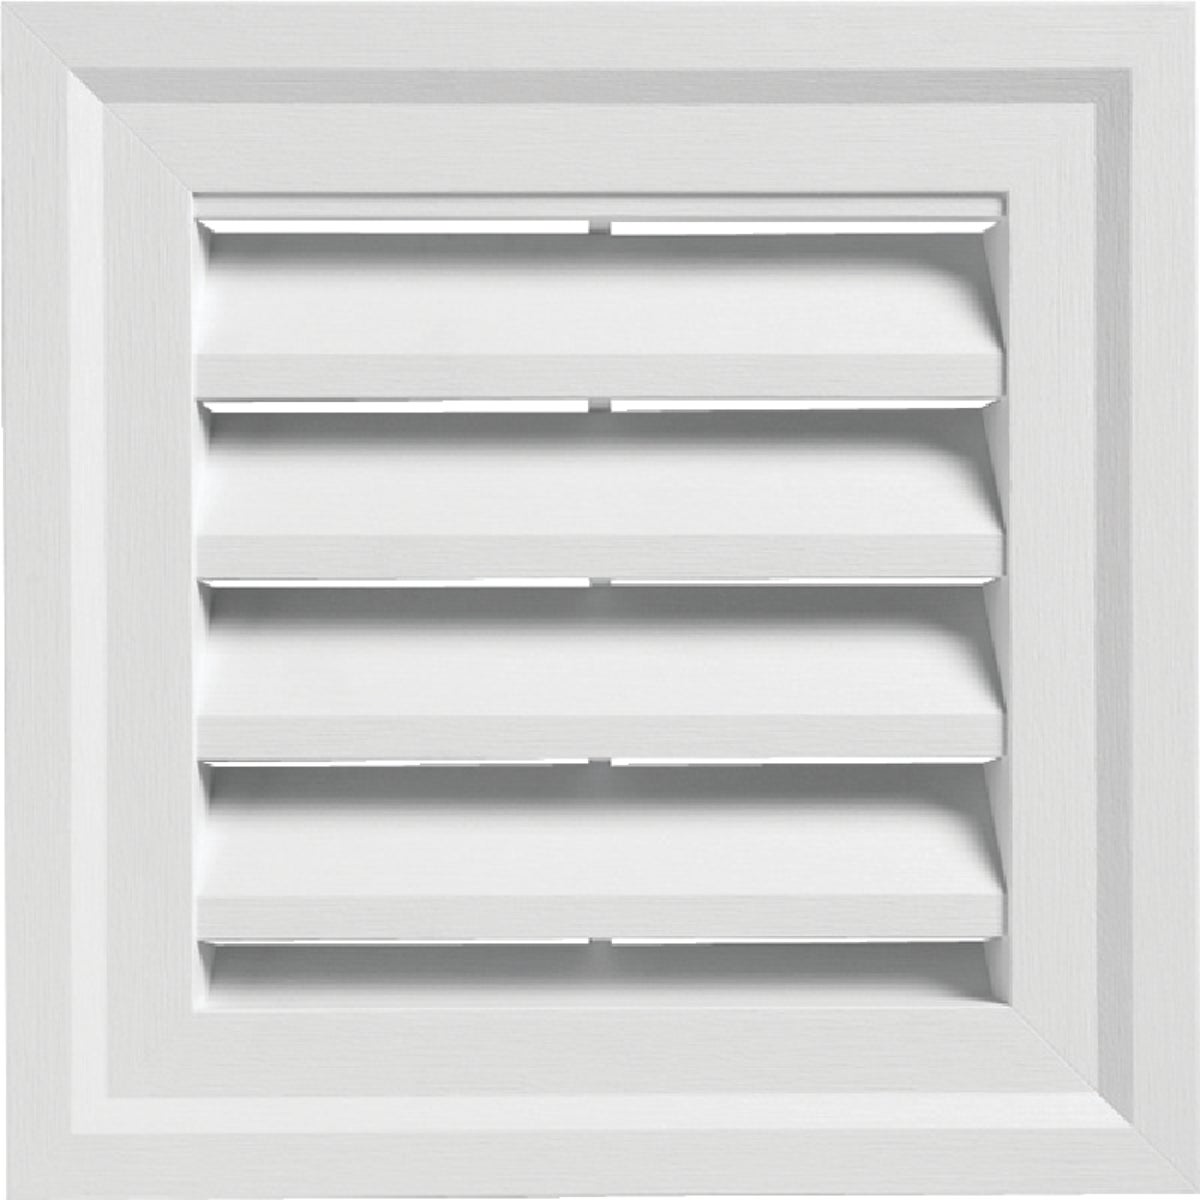 Item 107948, The square gable vent is used to vent the attic.